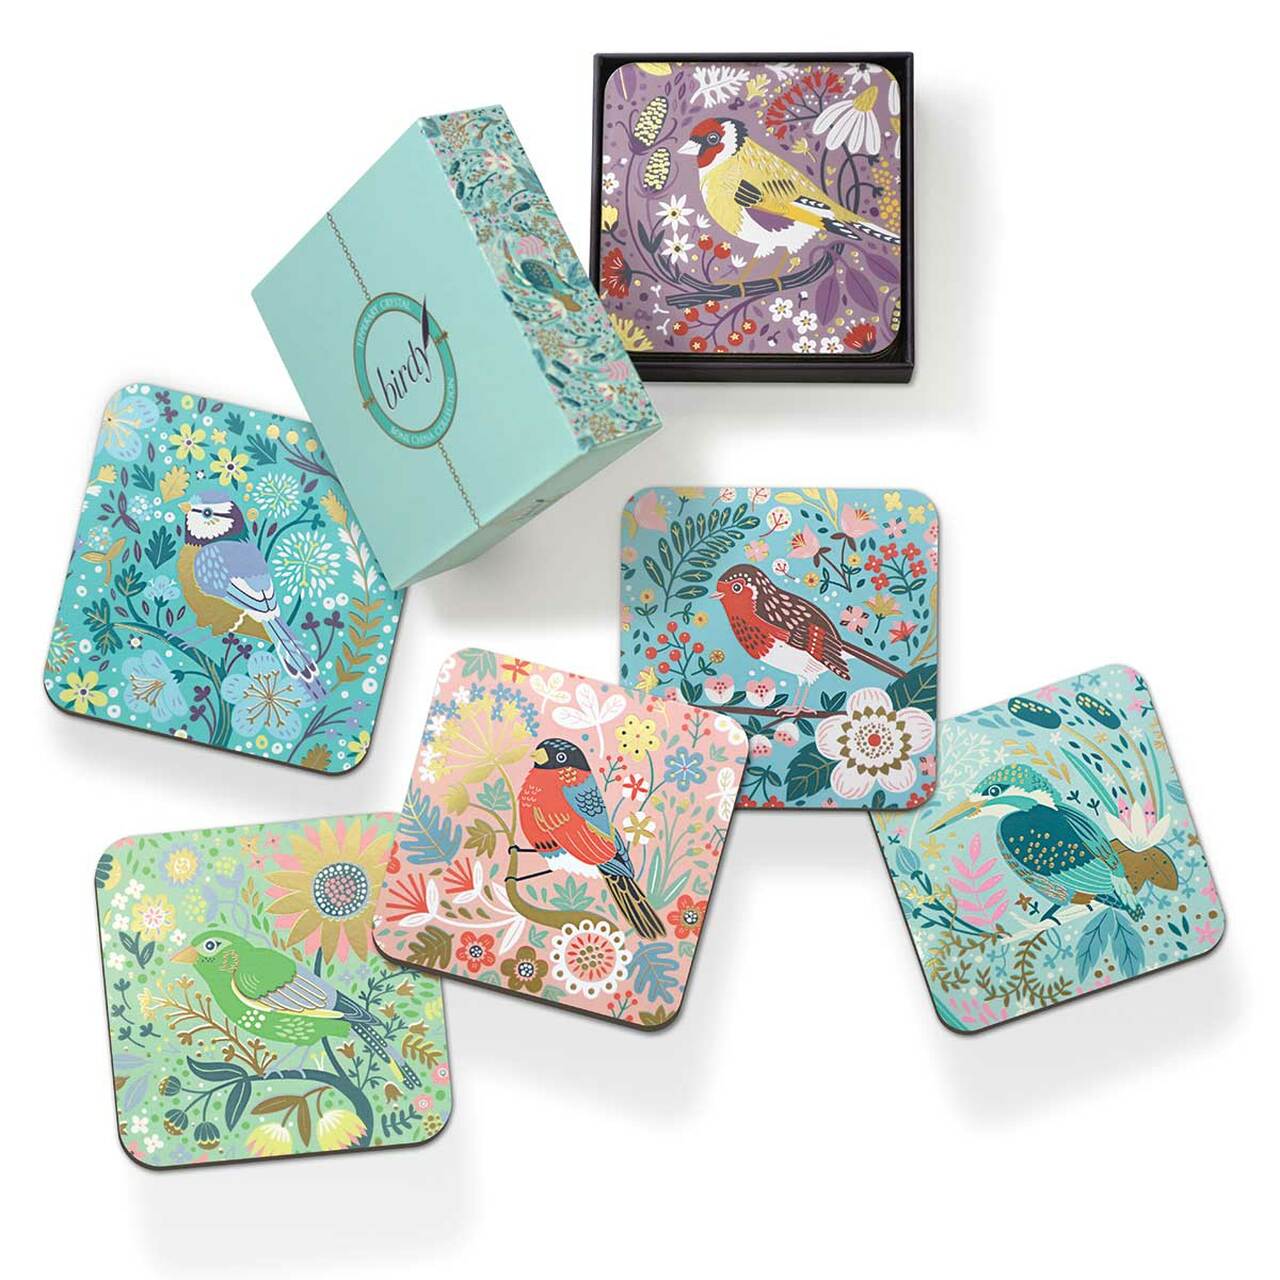 Tipperary Birdy Coasters Set of 6  The Birdy Collection is a series of 6 exclusively commissioned illustrations inspired by native Irish birds; Bullfinch, Goldfinch, Blue tit, Greenfinch, Kingfisher and Robin.